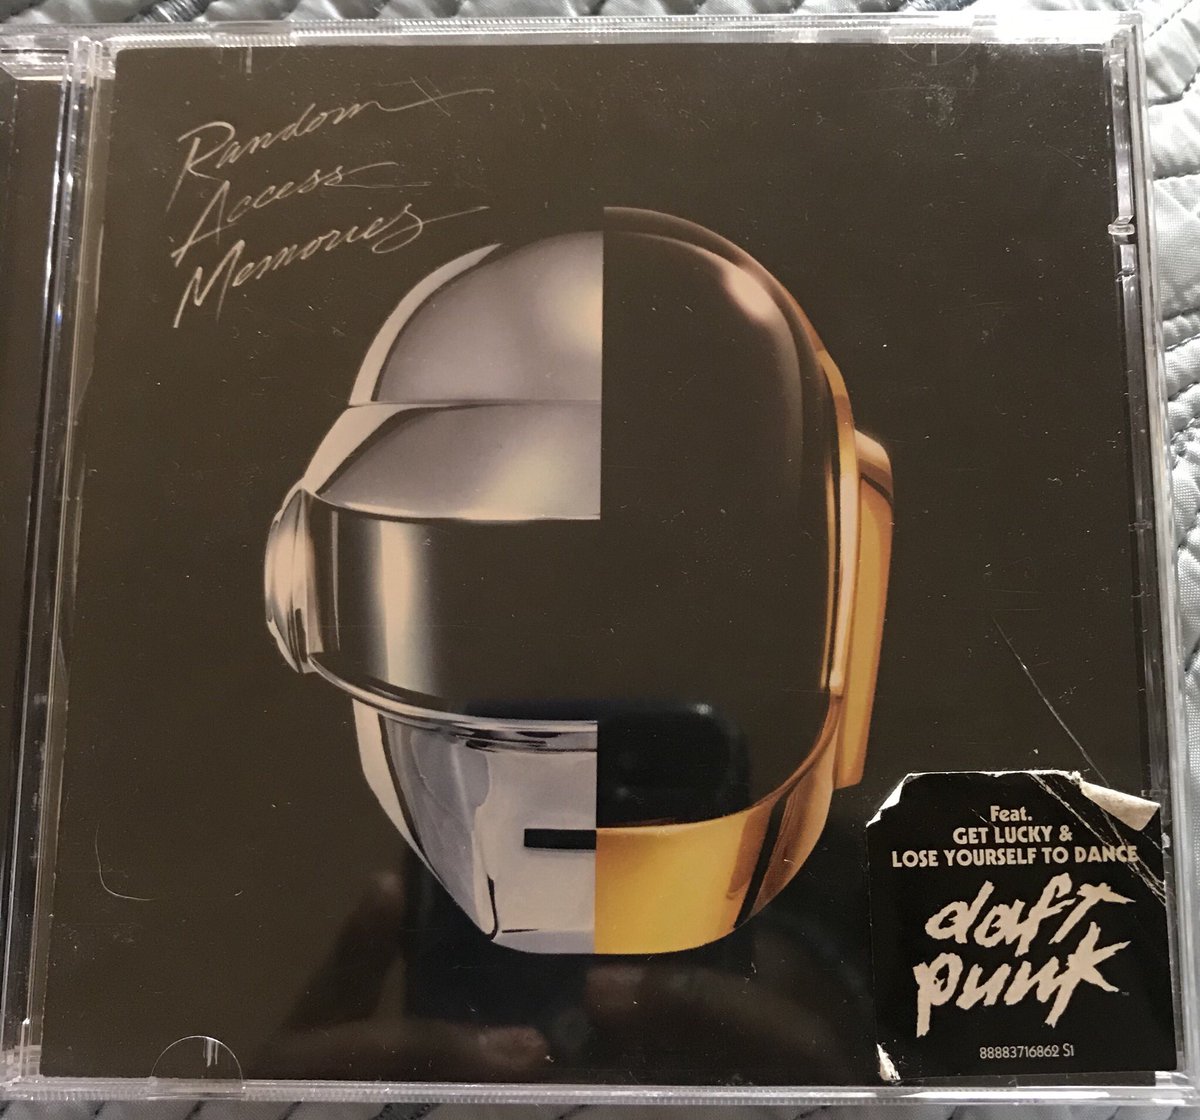 #1: Random Access Memories by Daft Punk. One of my favorite groups of all time. I fell in love with them in when I was younger and have loved them ever since. If they ever perform again, I’m dropping money to go see them 